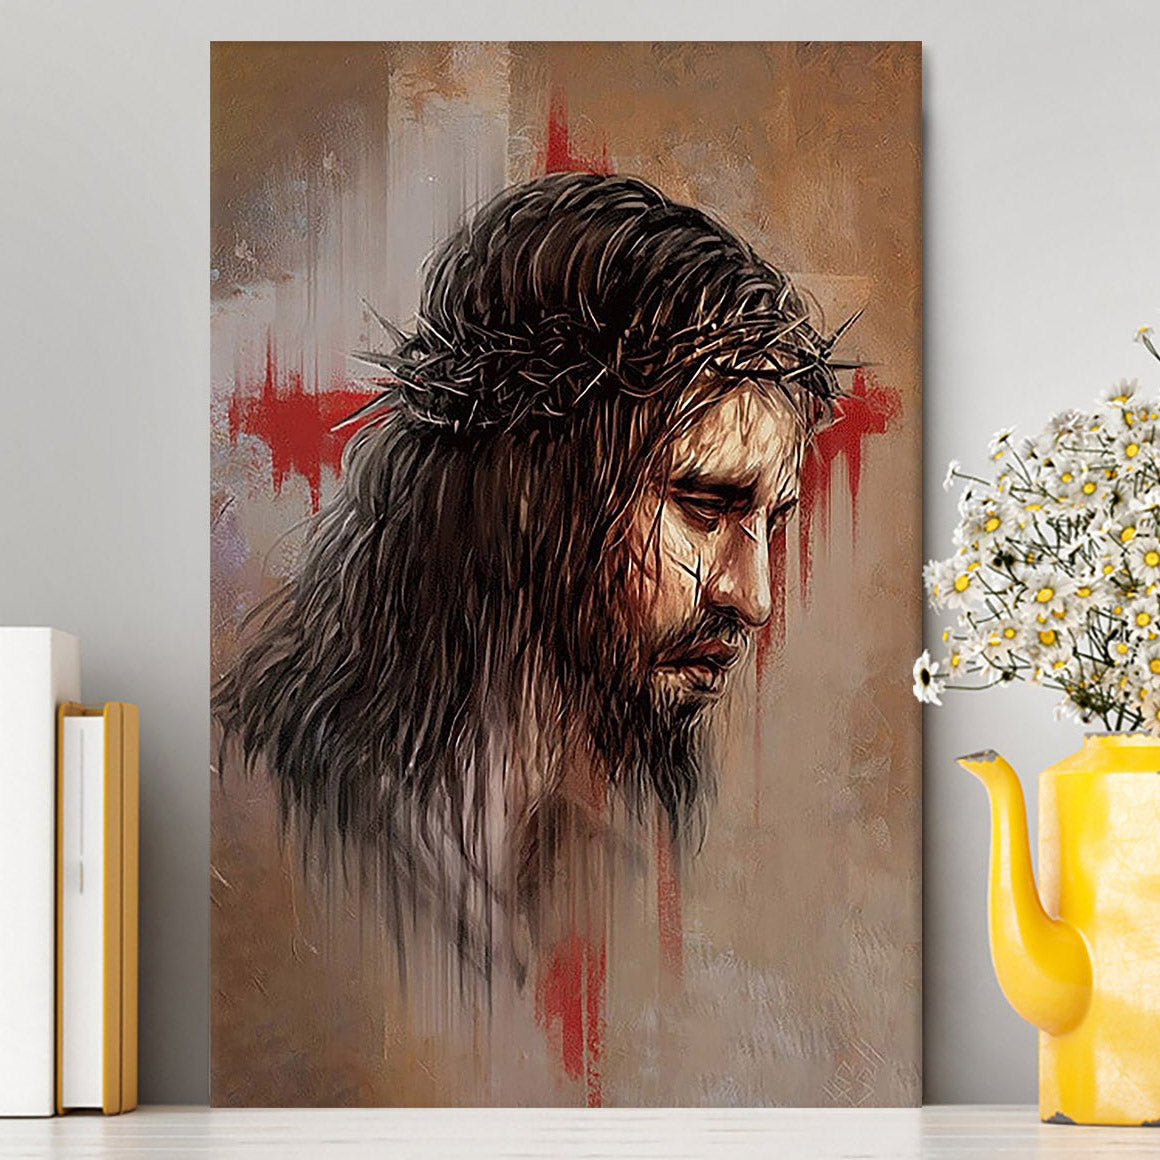 Jesus Paid It All Thorn Of Crown Canvas Art - Christian Art - Bible Verse Wall Art - Religious Home Decor